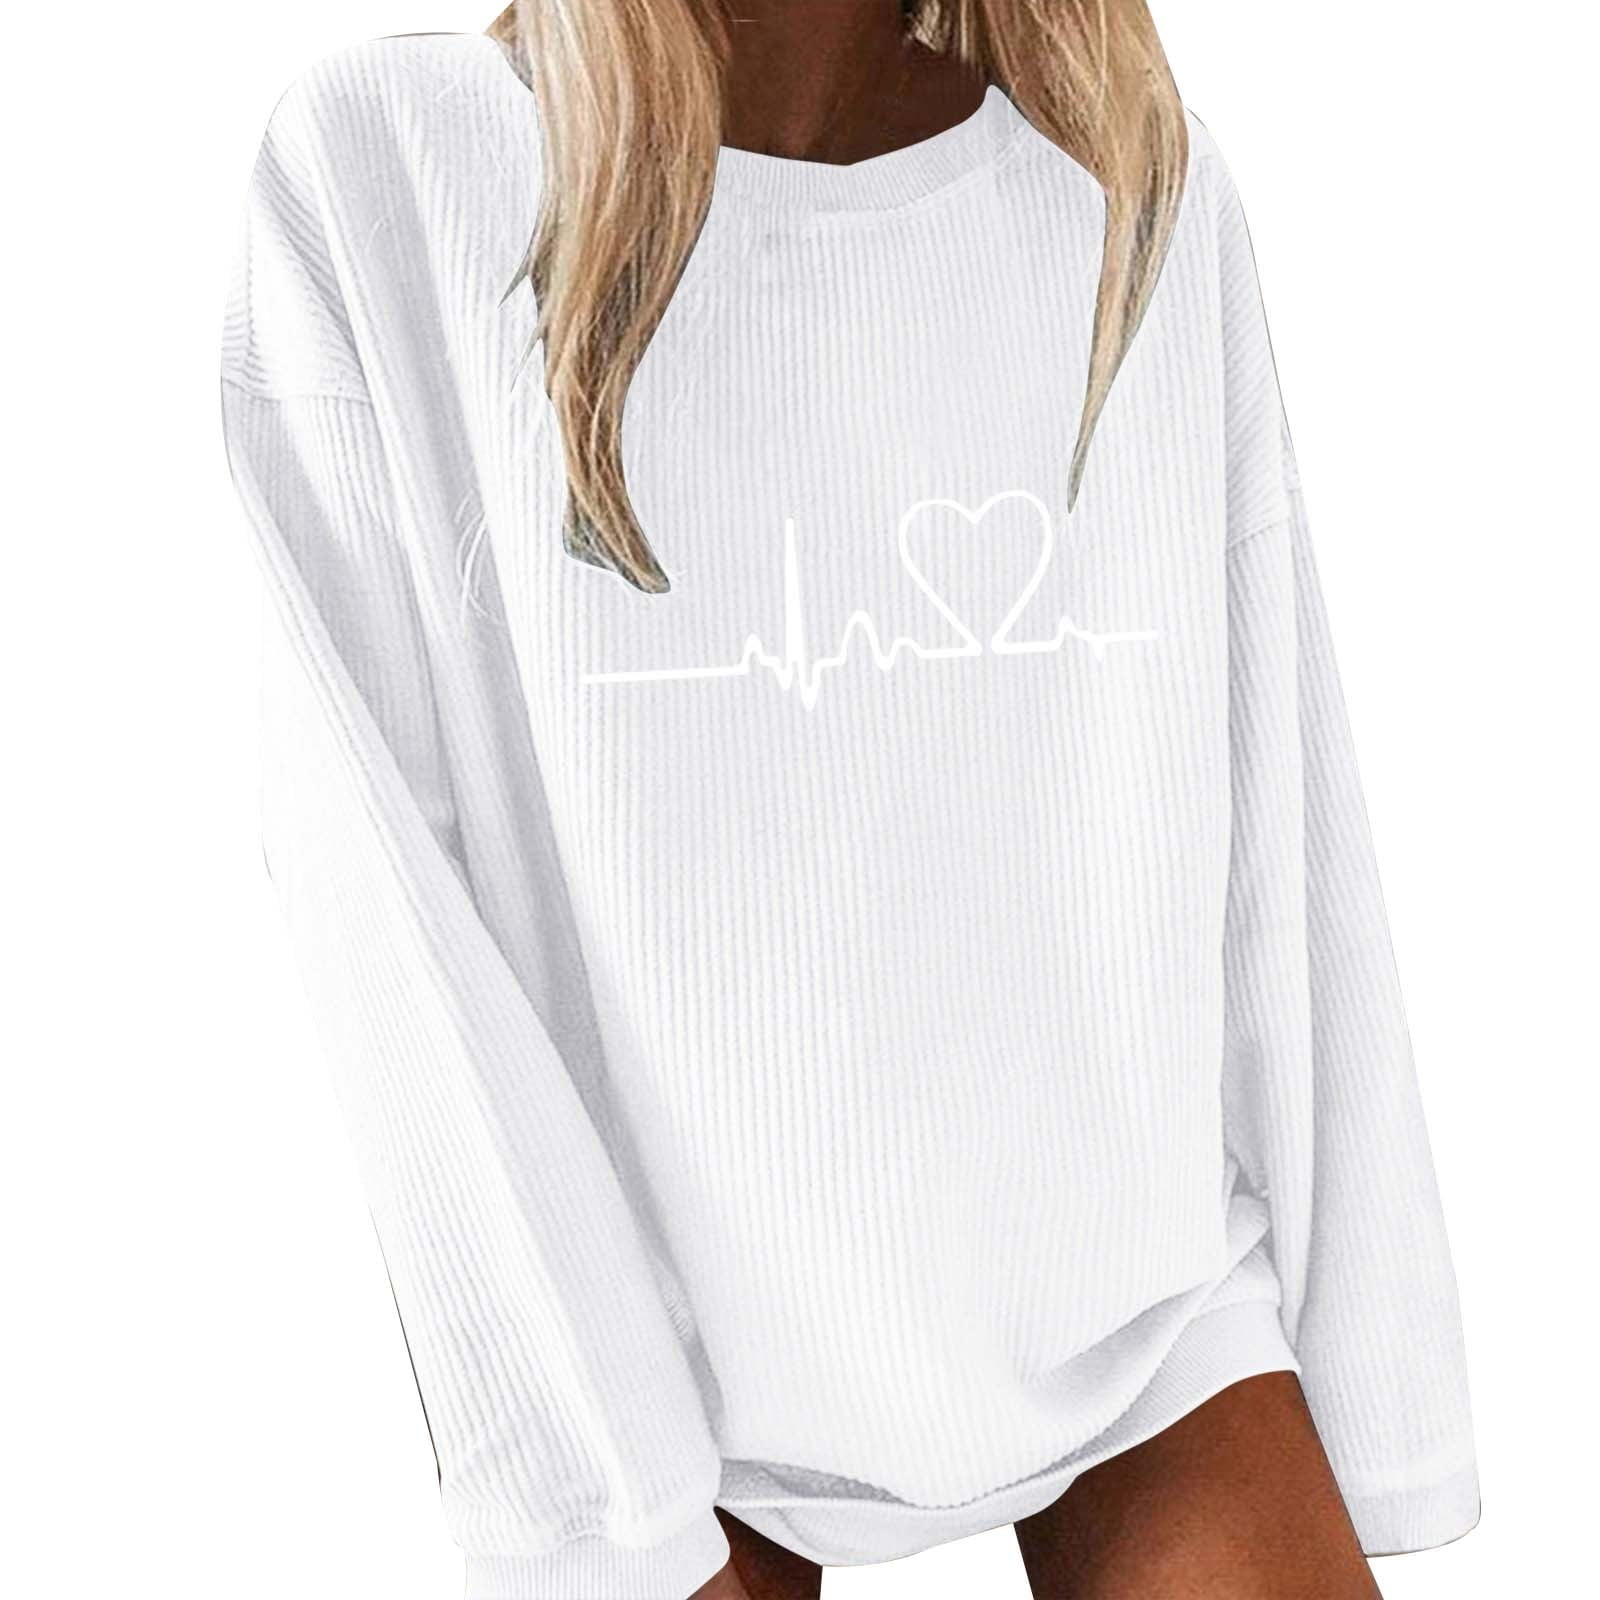 HUCHPI Sweatshirts for Women Trendy Casual Loose Fit Long Sleeve Crew Neck  Comfy Soft Cute Pullover Tunic Tops